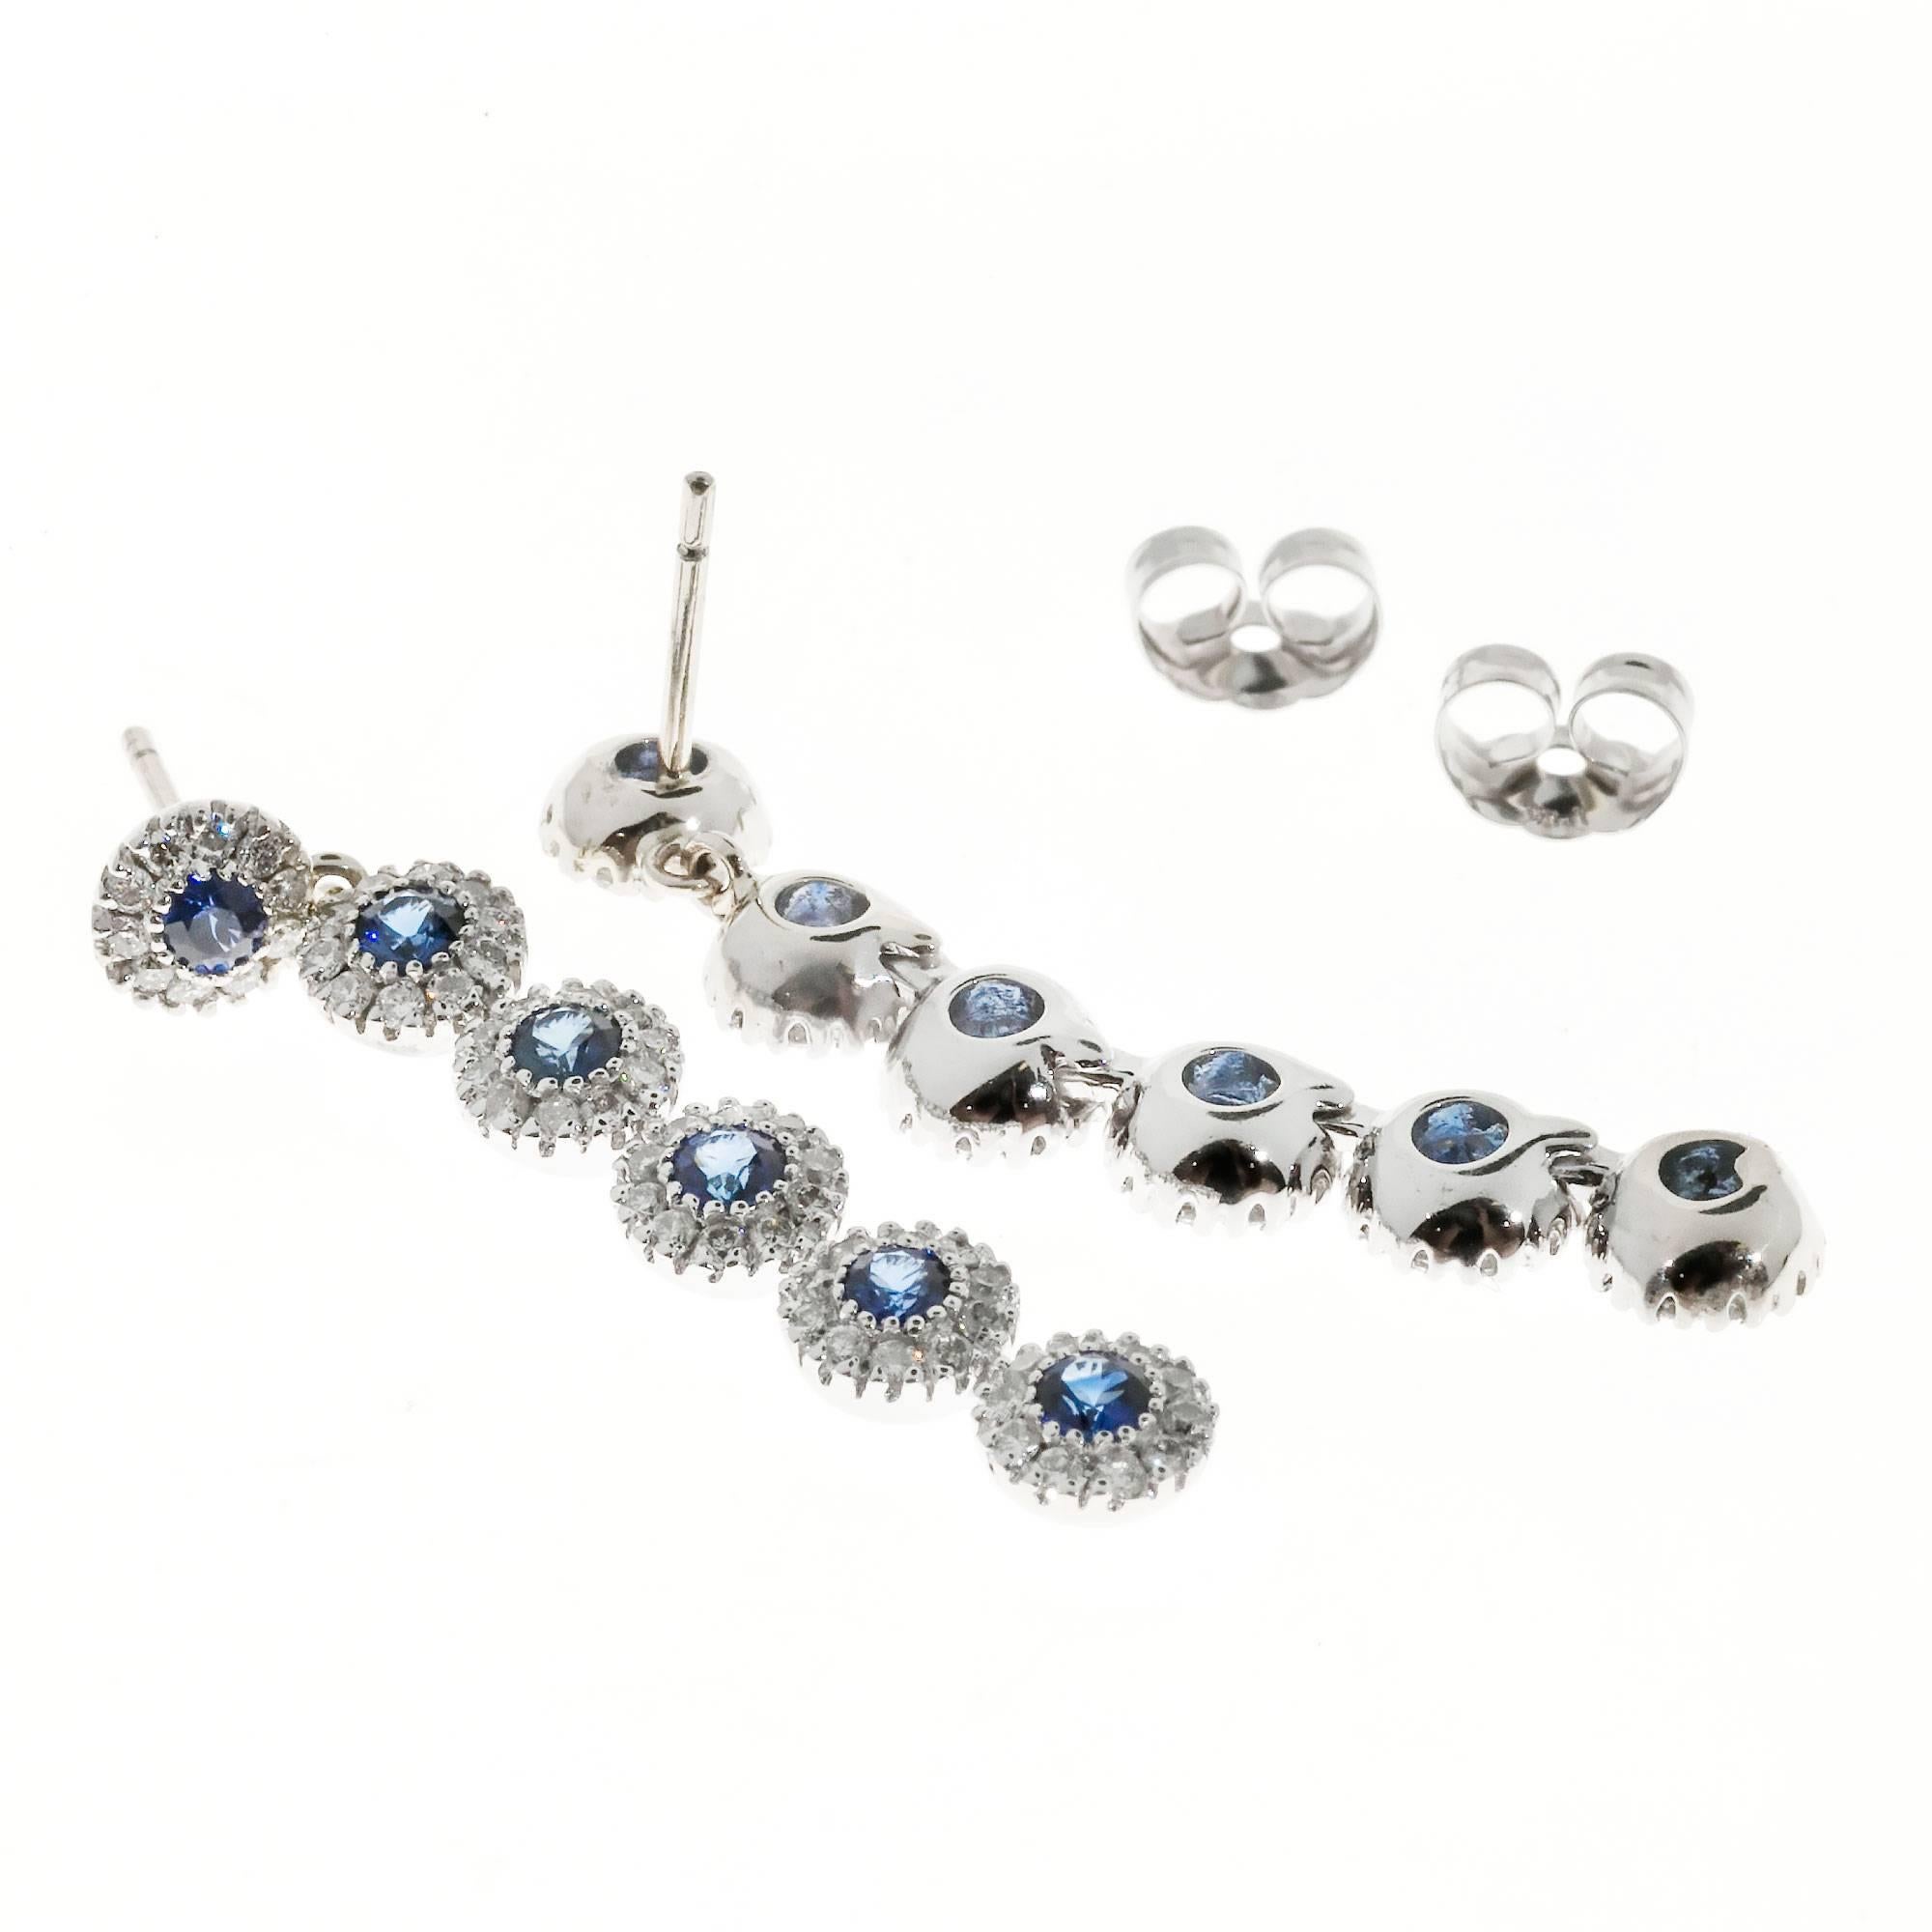 Six section 14k white gold Sapphire diamond halo long dangle earrings.

120 full cut diamonds, approx. total weight .60cts, G, SI1
12 2.2mm genuine bright blue Sapphires, approx. total weight .60cts
14k White Gold
Tested: 14k
4.3 grams
Top to